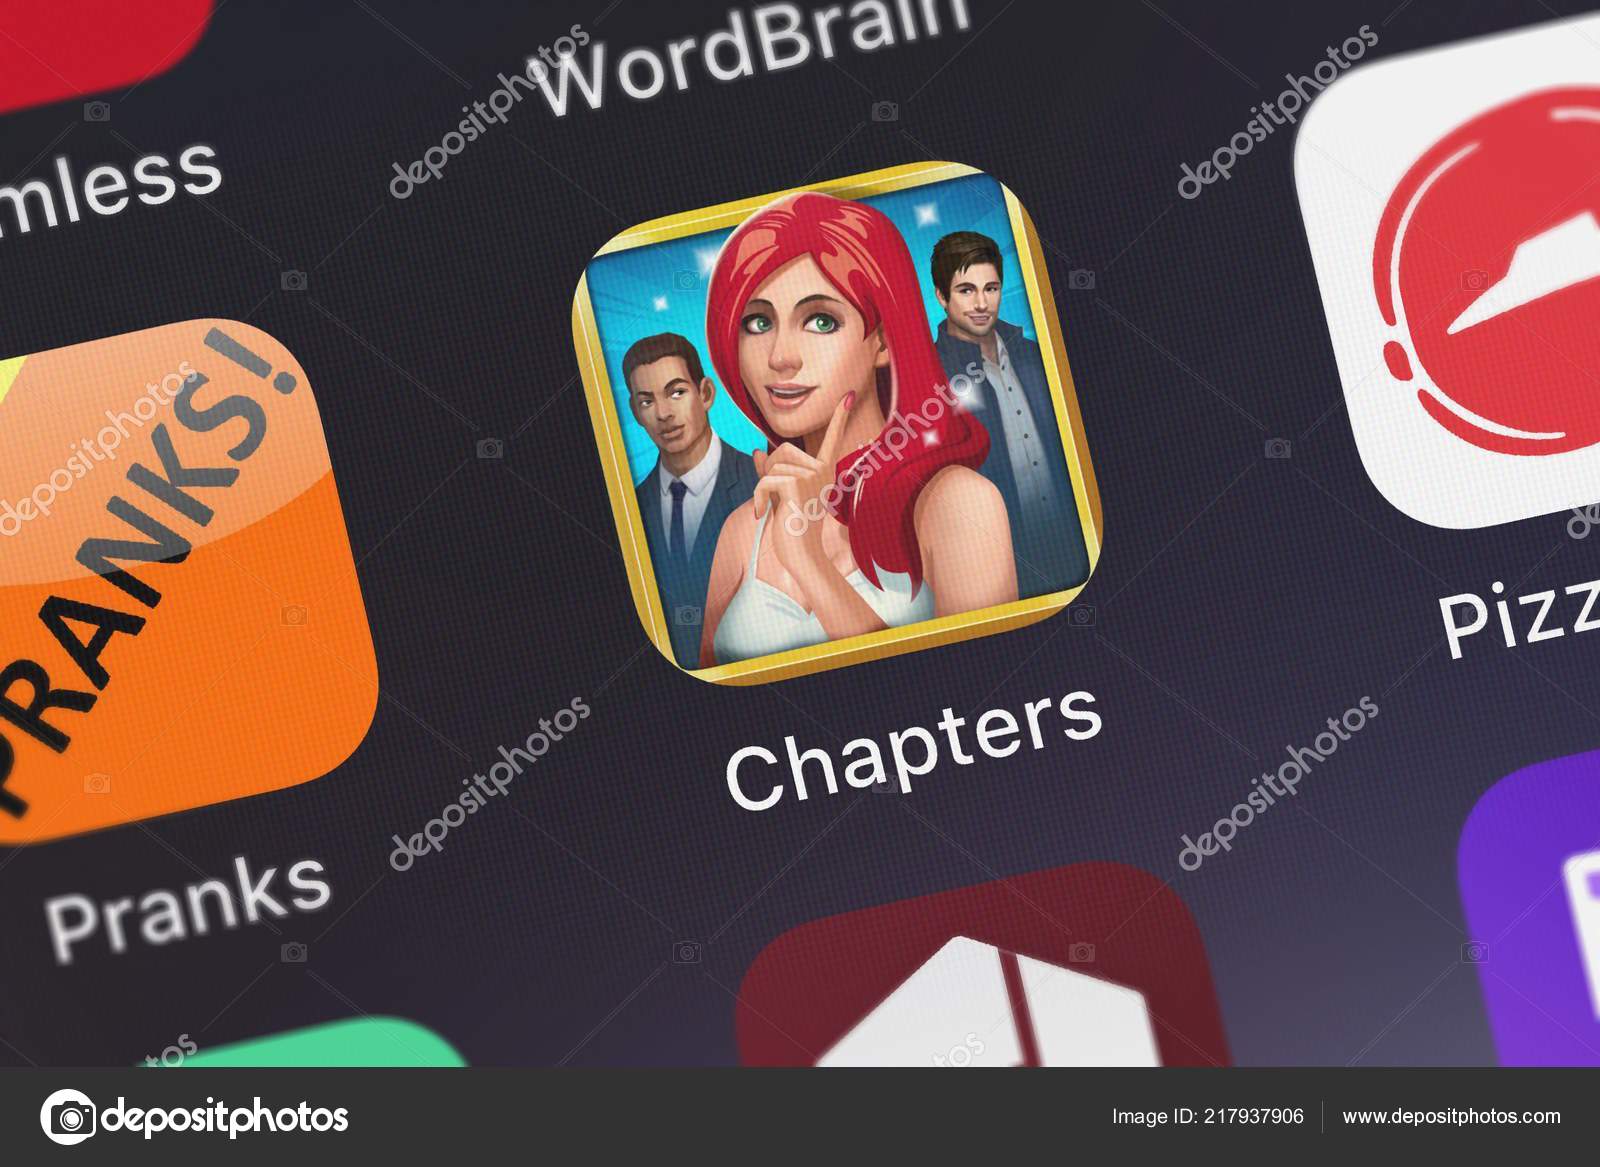 Chapters Interactive Stories App